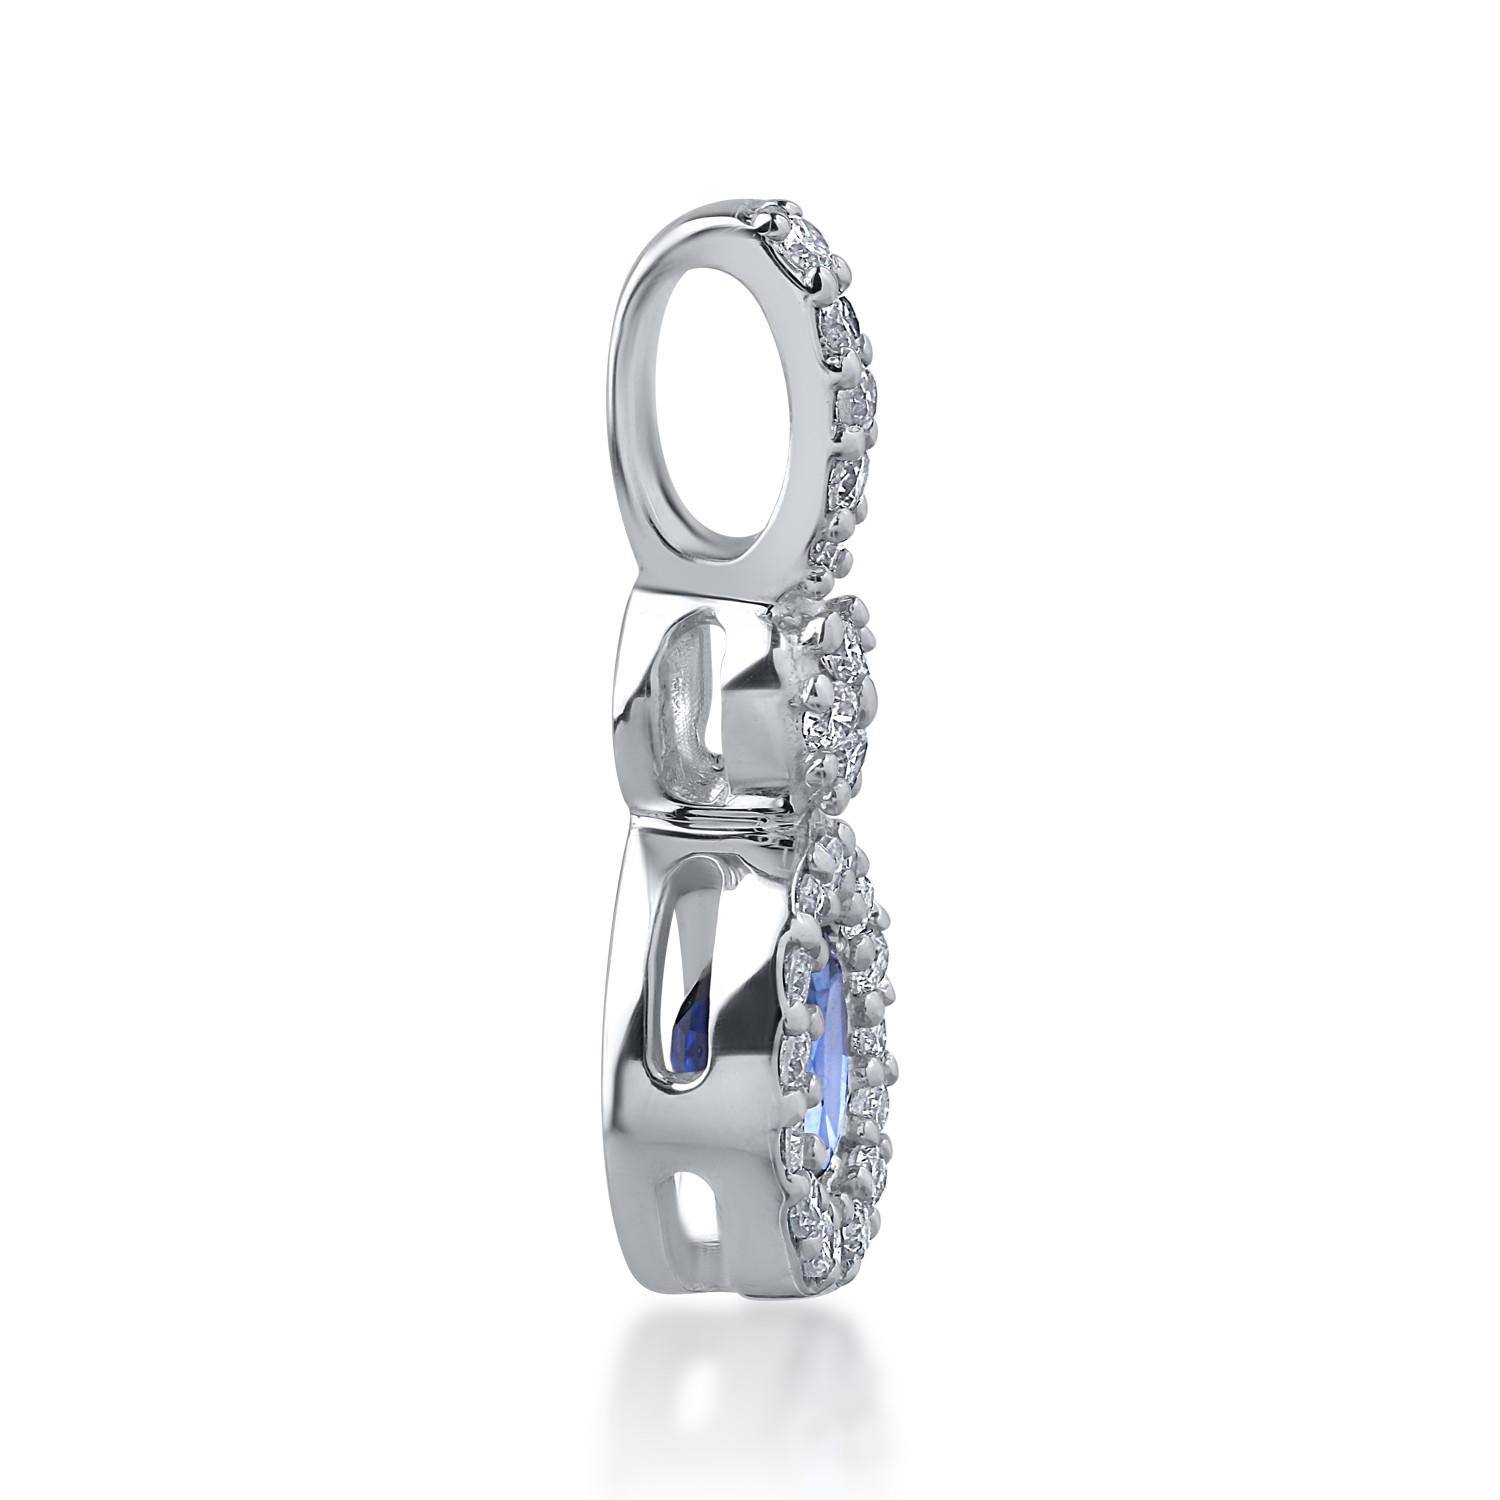 18K white gold pendant with 0.25ct sapphire and 0.24ct diamonds